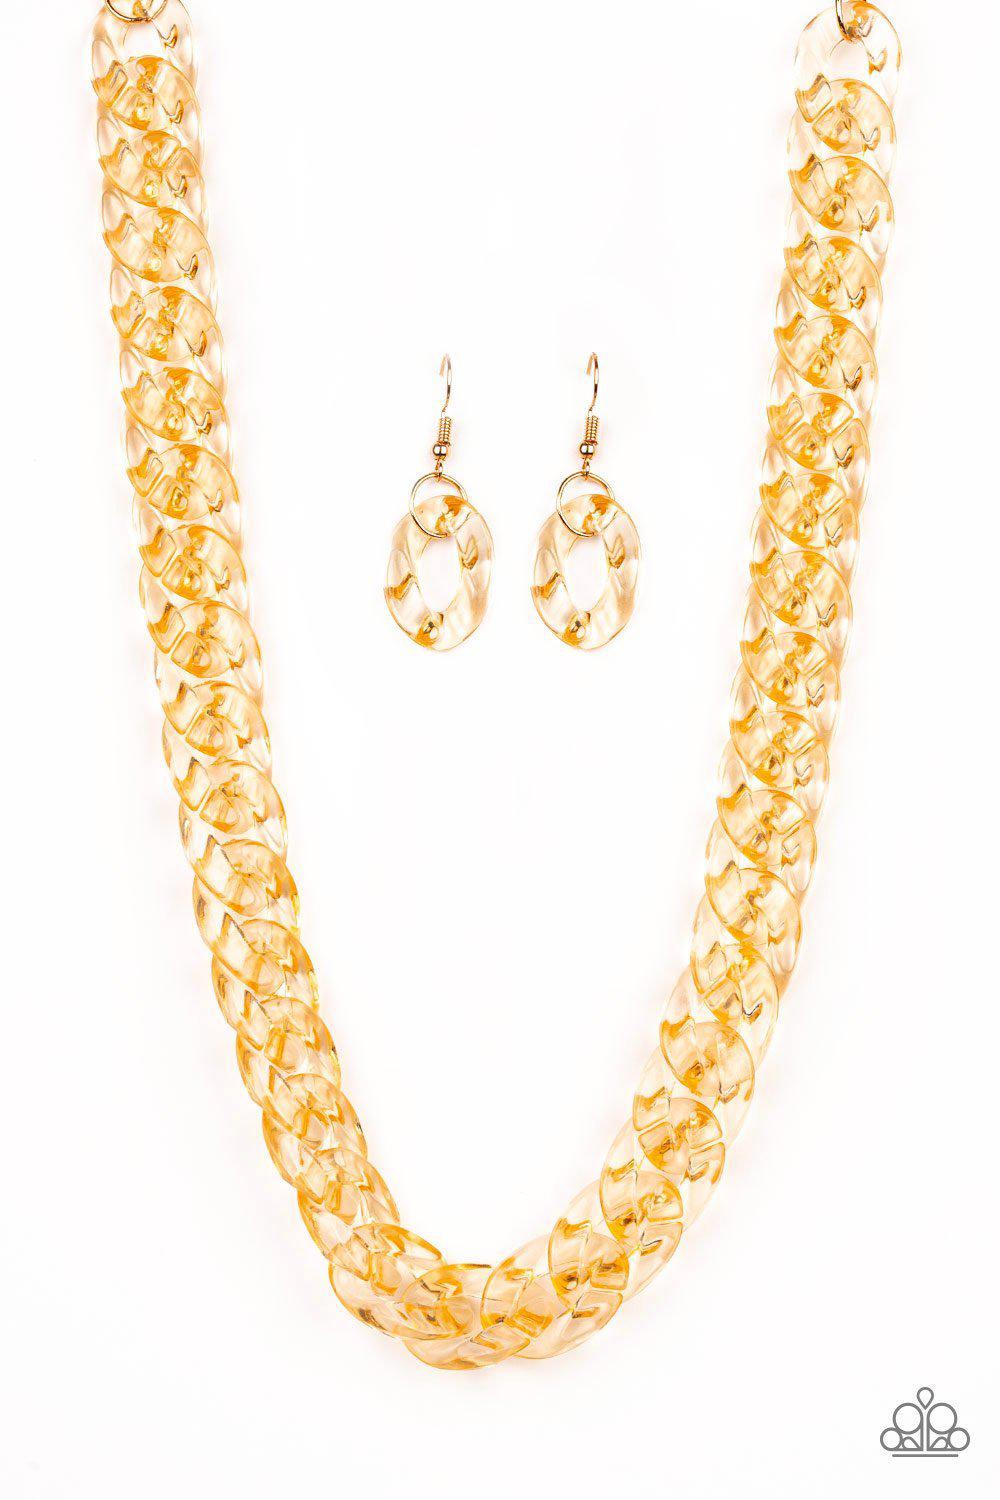 Put it on Ice Gold Acrylic Necklace and matching Earrings - Paparazzi Accessories-CarasShop.com - $5 Jewelry by Cara Jewels